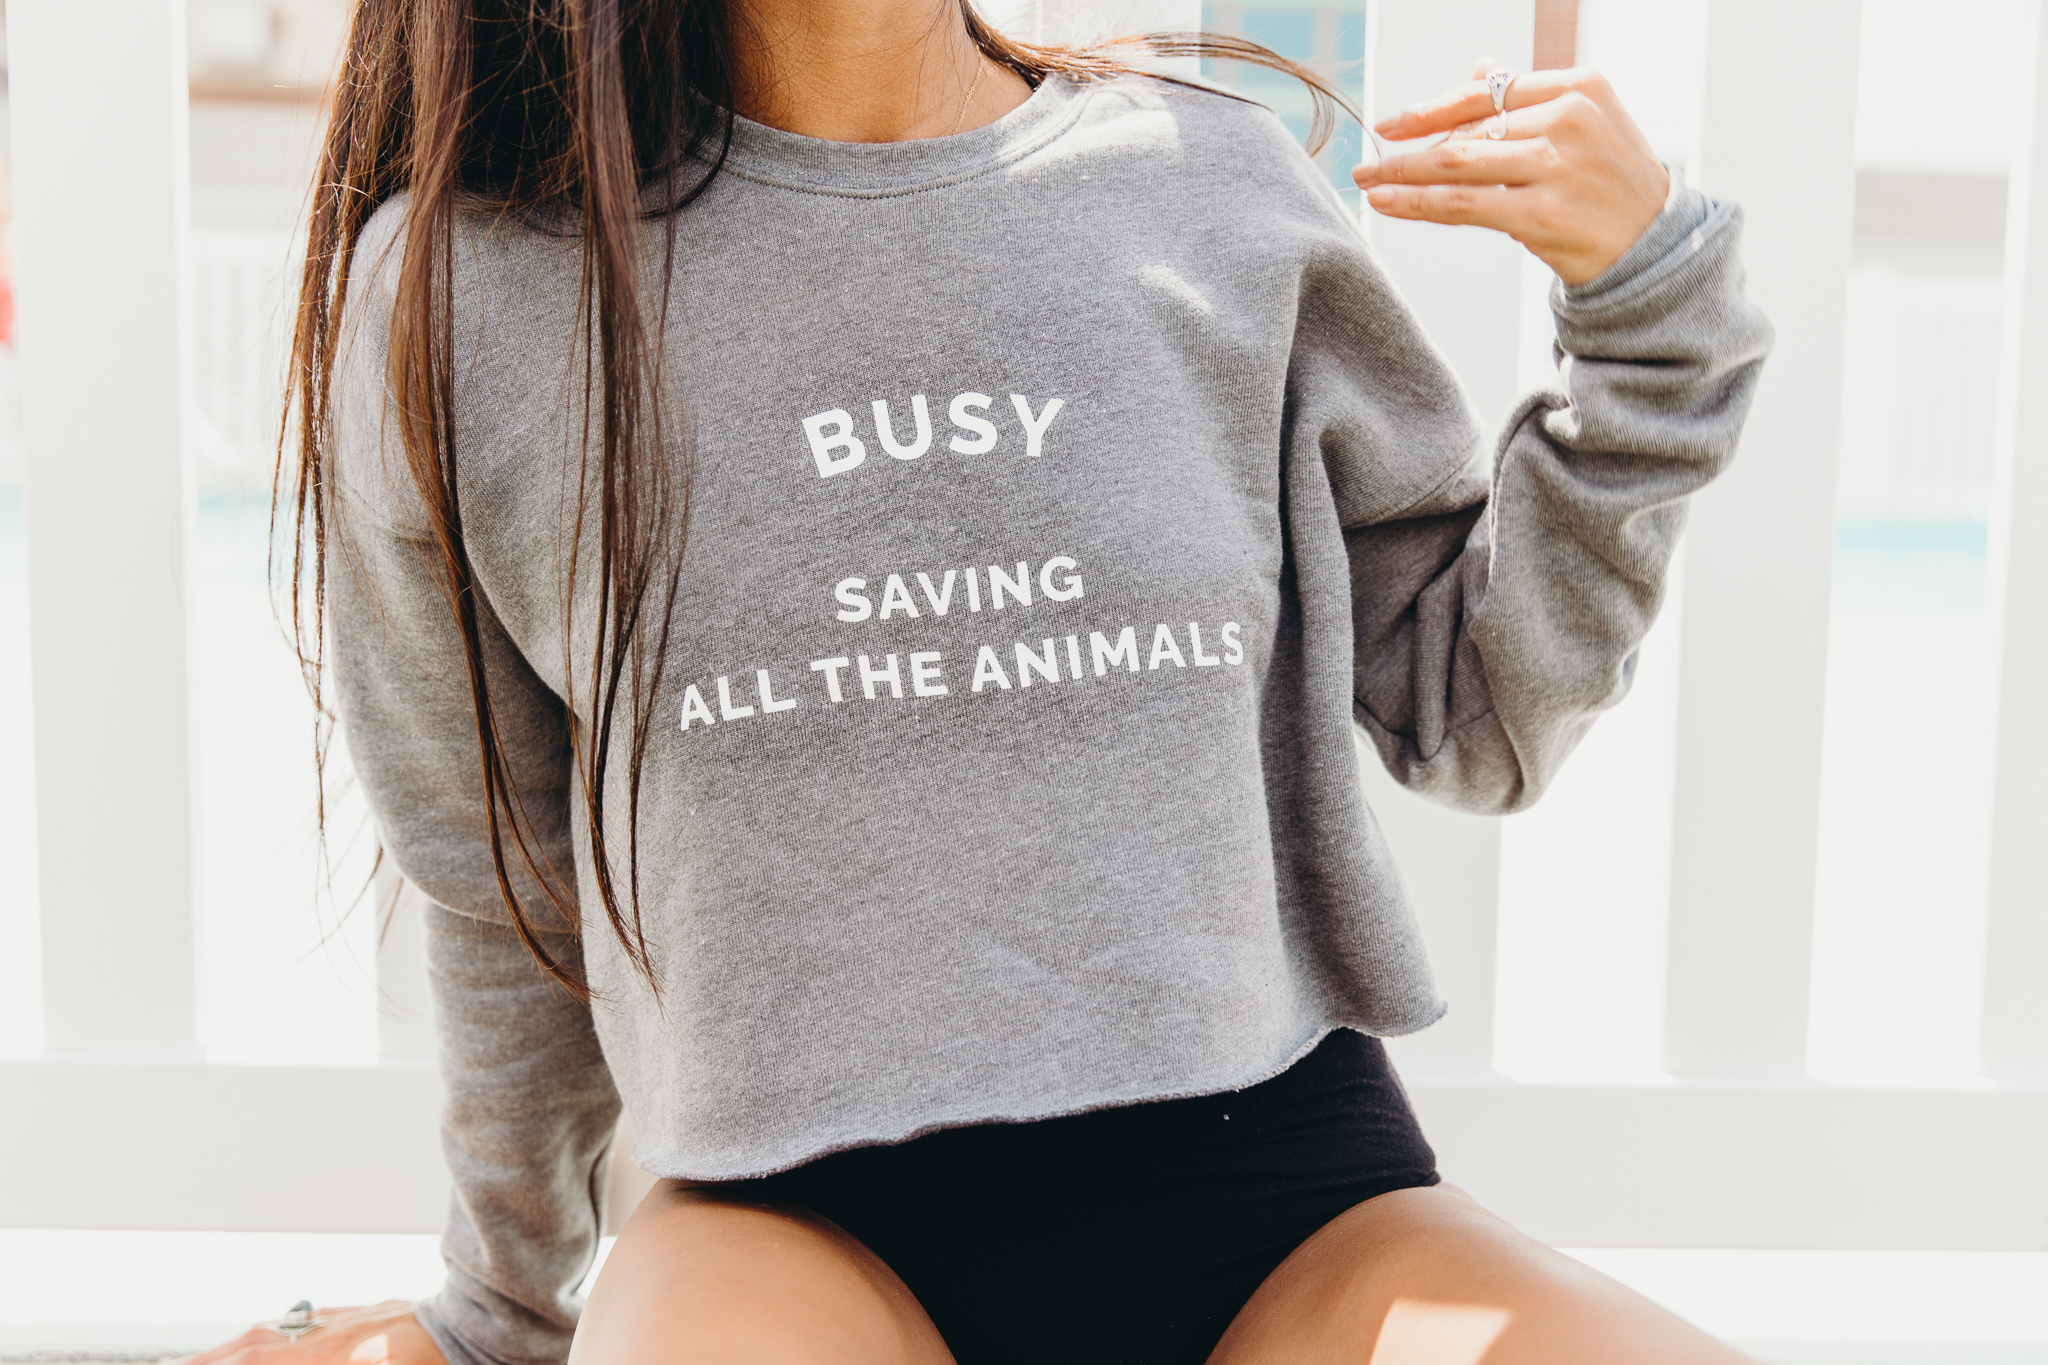 Wholesome Culture busy saving all the animals shirt